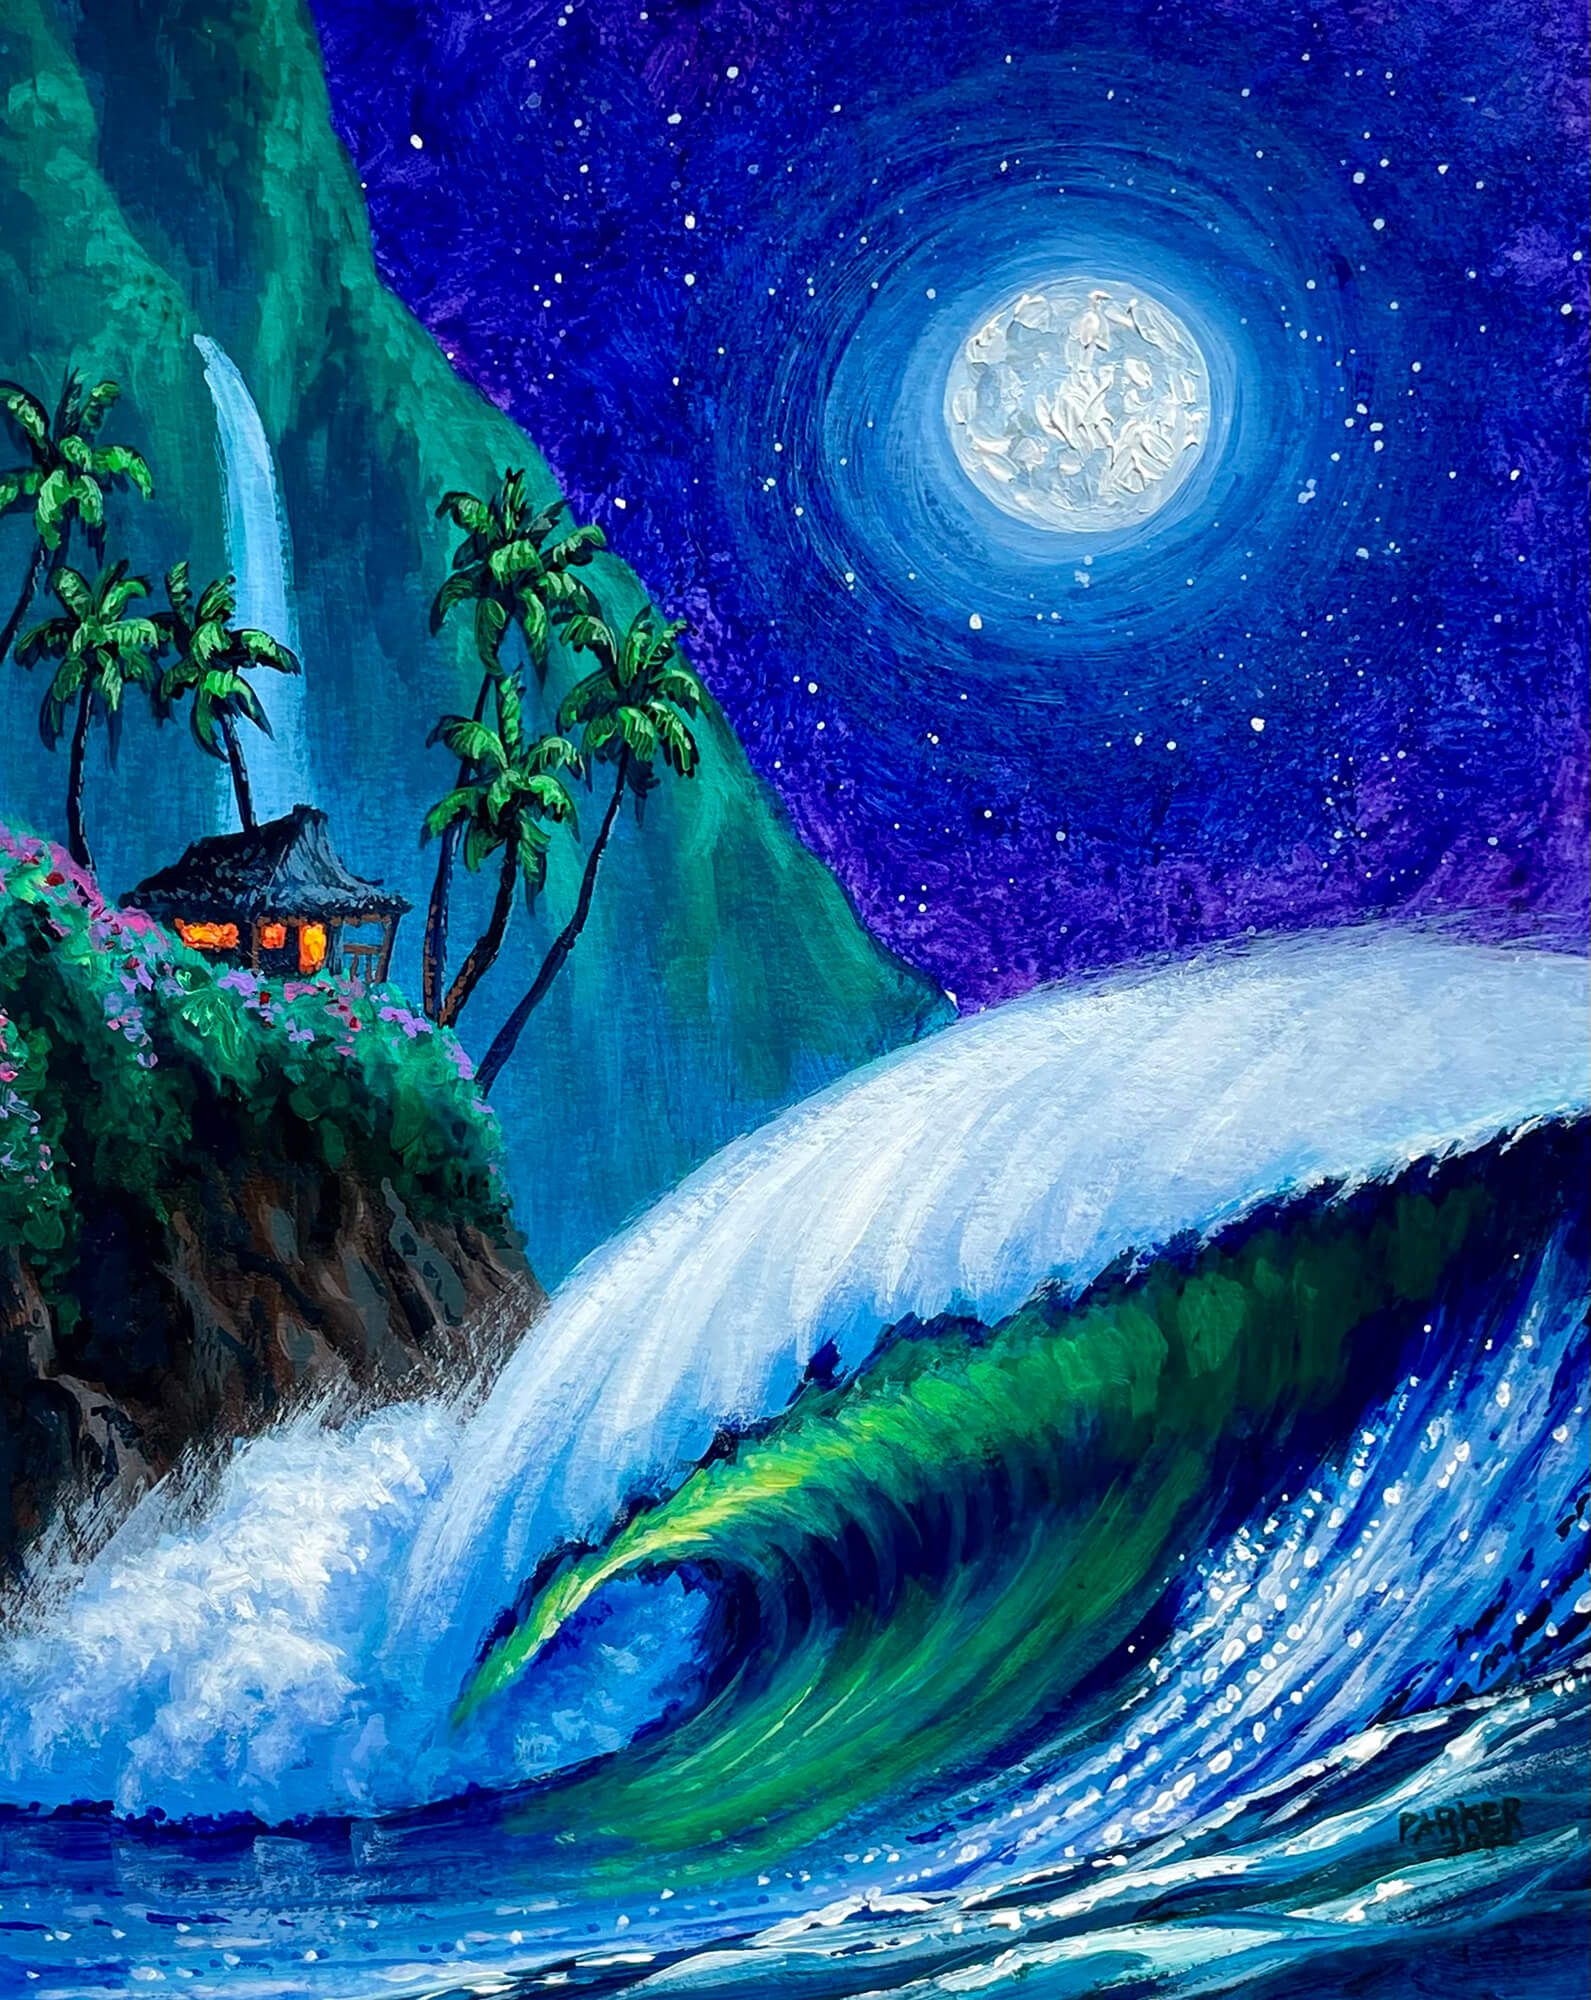 Maui artist Patrick Parker original painting of a beach cabin and waves with full moon and waterfall